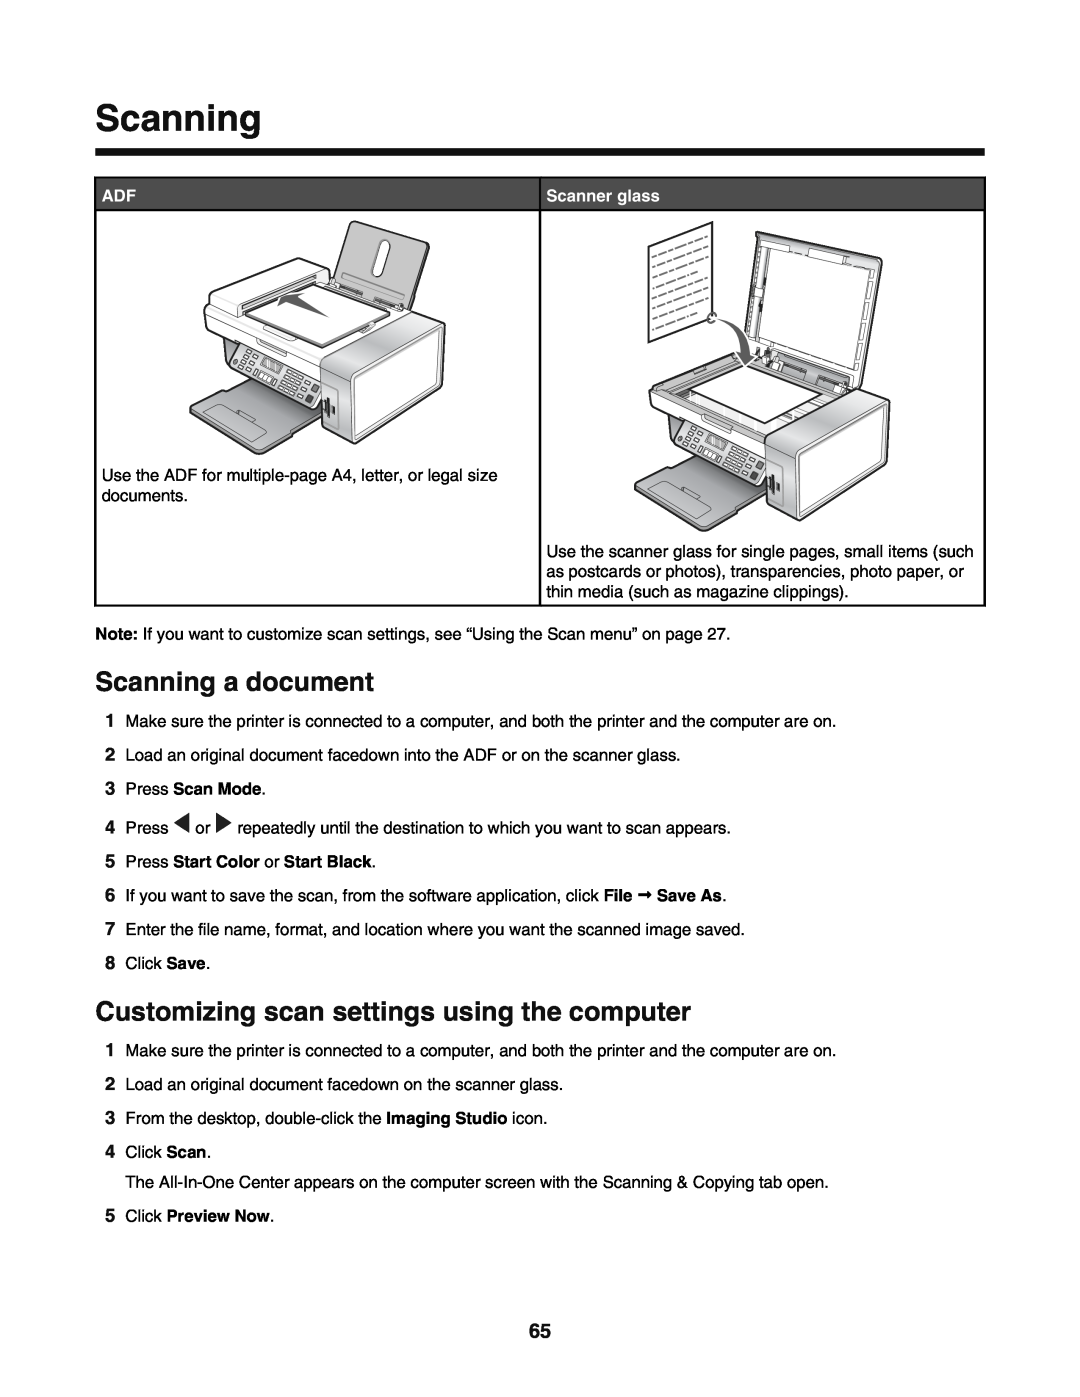 Lexmark 5400 Scanning a document, Customizing scan settings using the computer, Press Scan Mode, Click Preview Now 